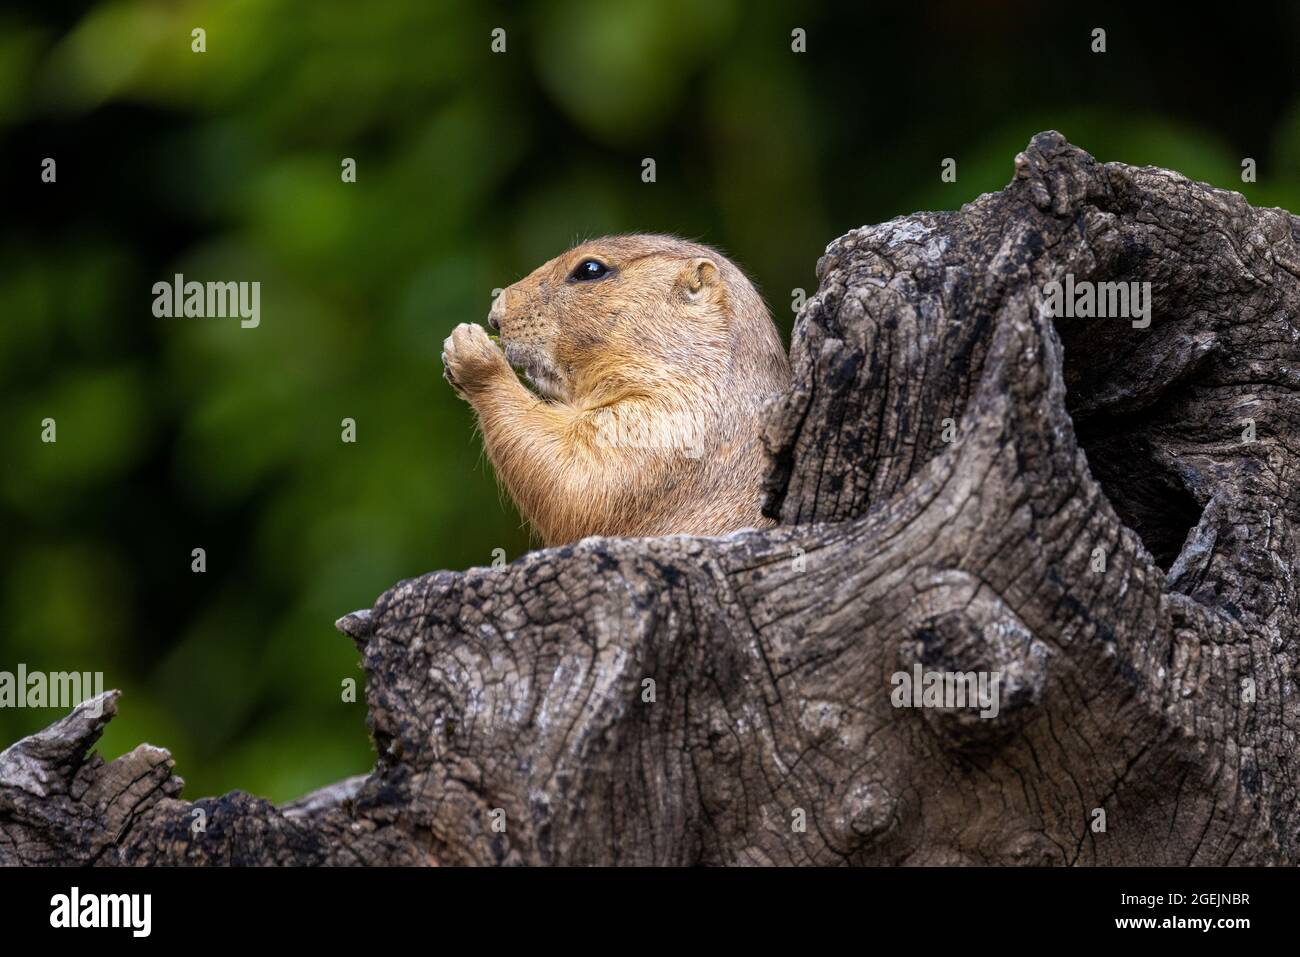 Close up profile portrait of a prairie dog, partially hidden by a dead tree trunk, eating a morsel, against a green bokeh background Stock Photo